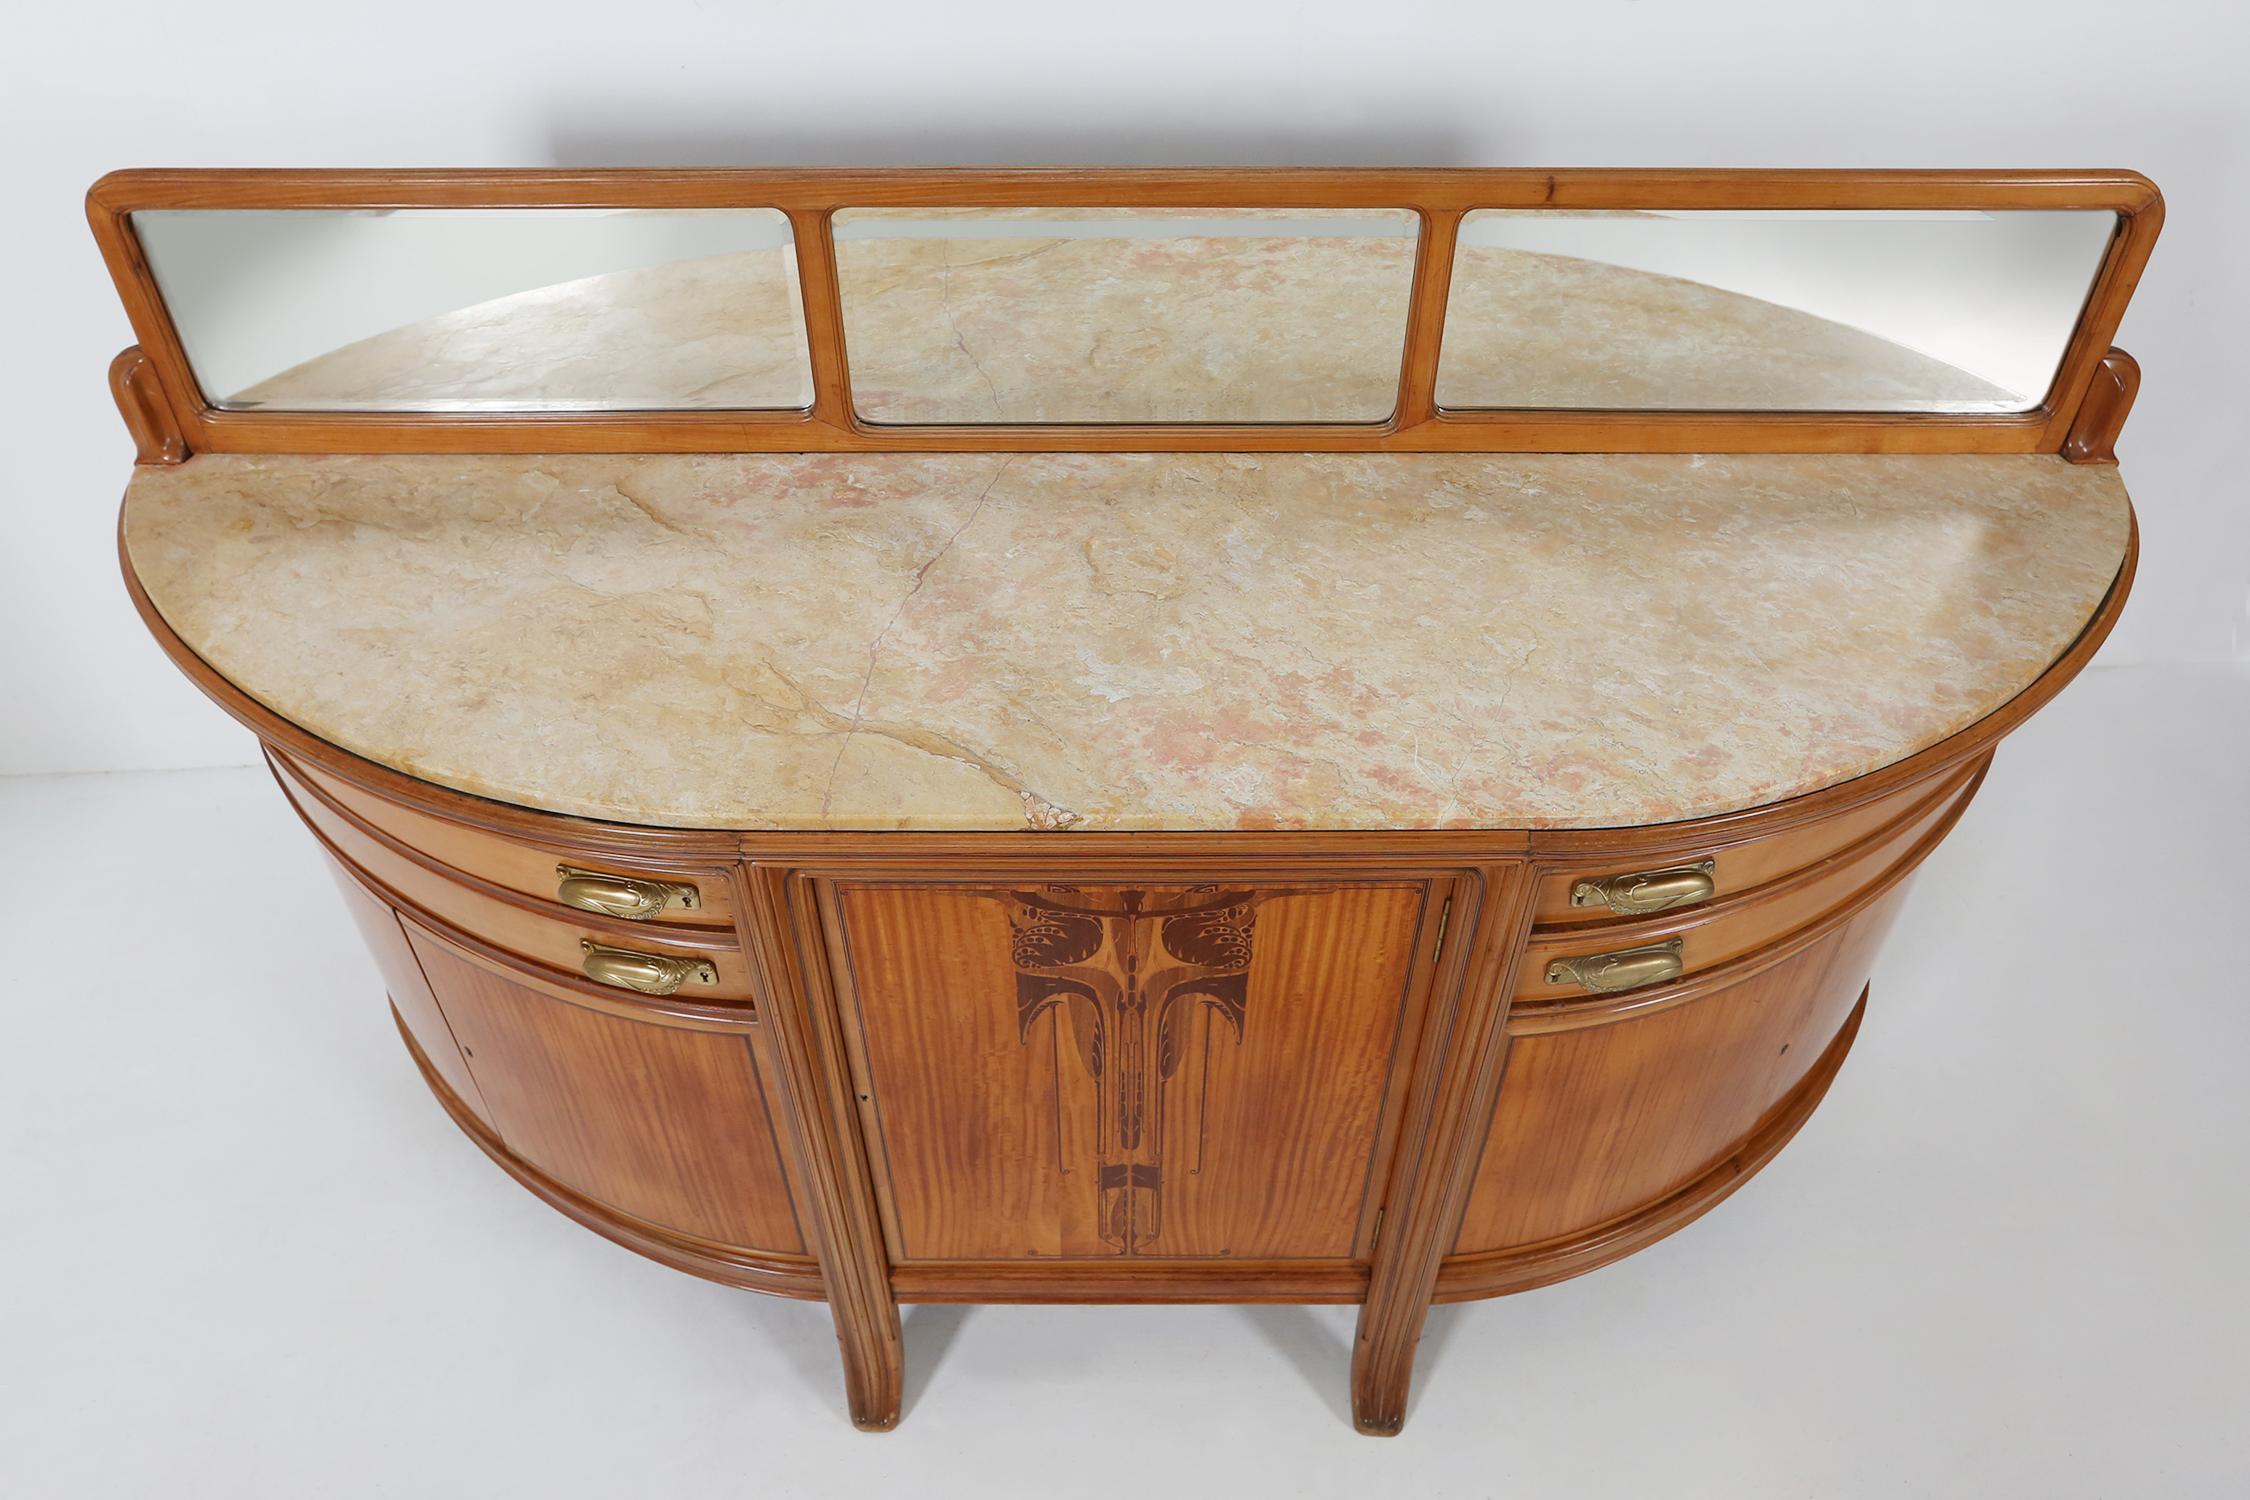 Early 20th Century Art Deco Sideboard by Maurice Dufrène 1911 For Sale